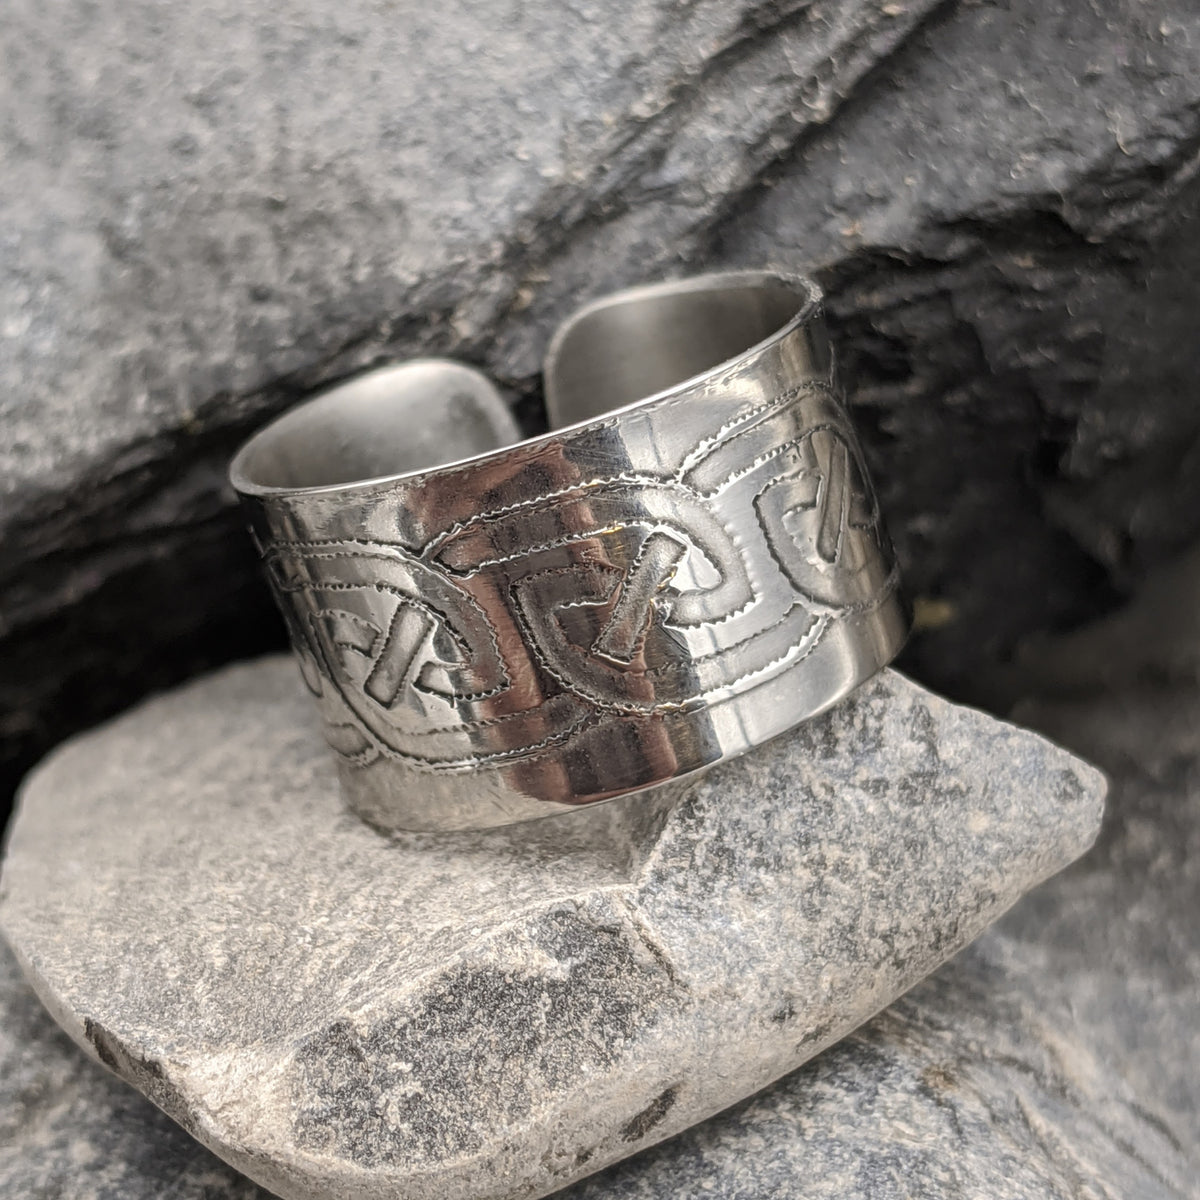 Celtic knot ring, Stainless Steel adjustable ring with Celtic knot design